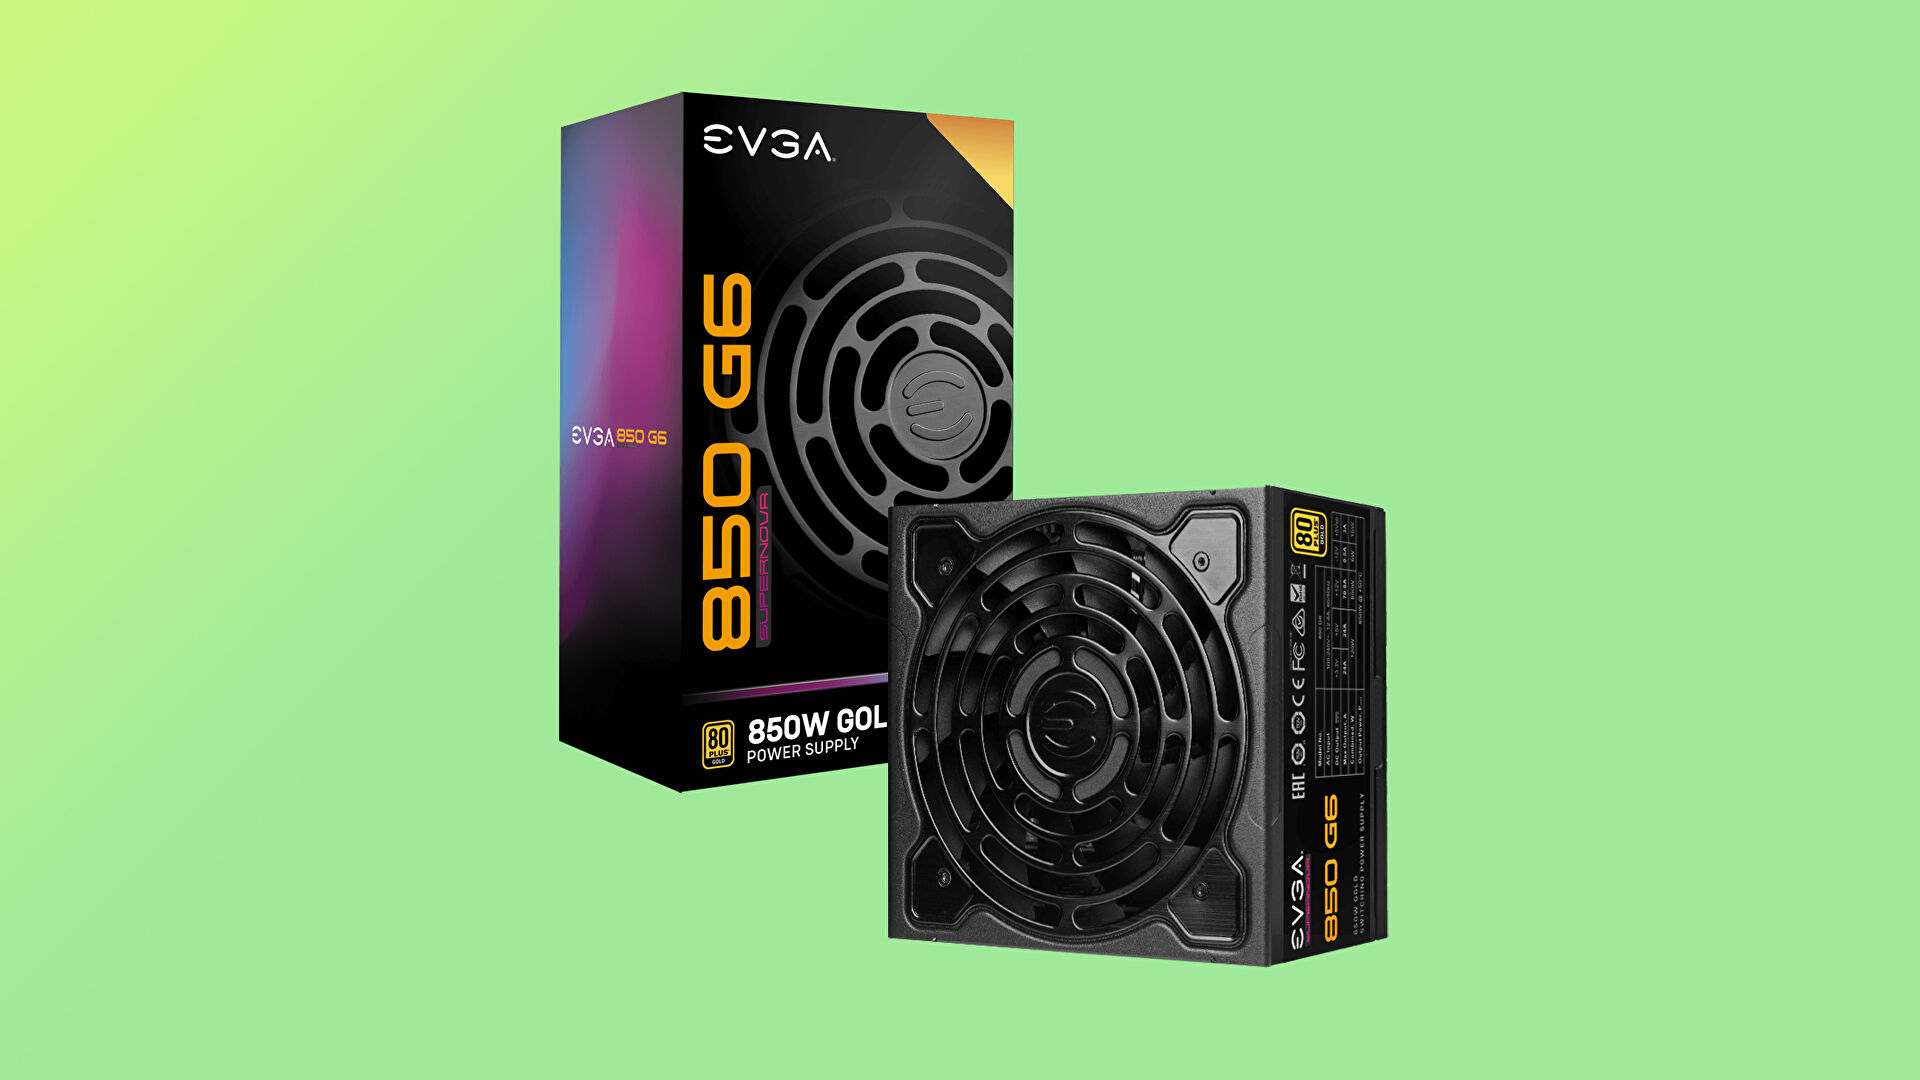 A top-tier 850W EVGA PSU for £73 is an incredible early Black Friday PC deal